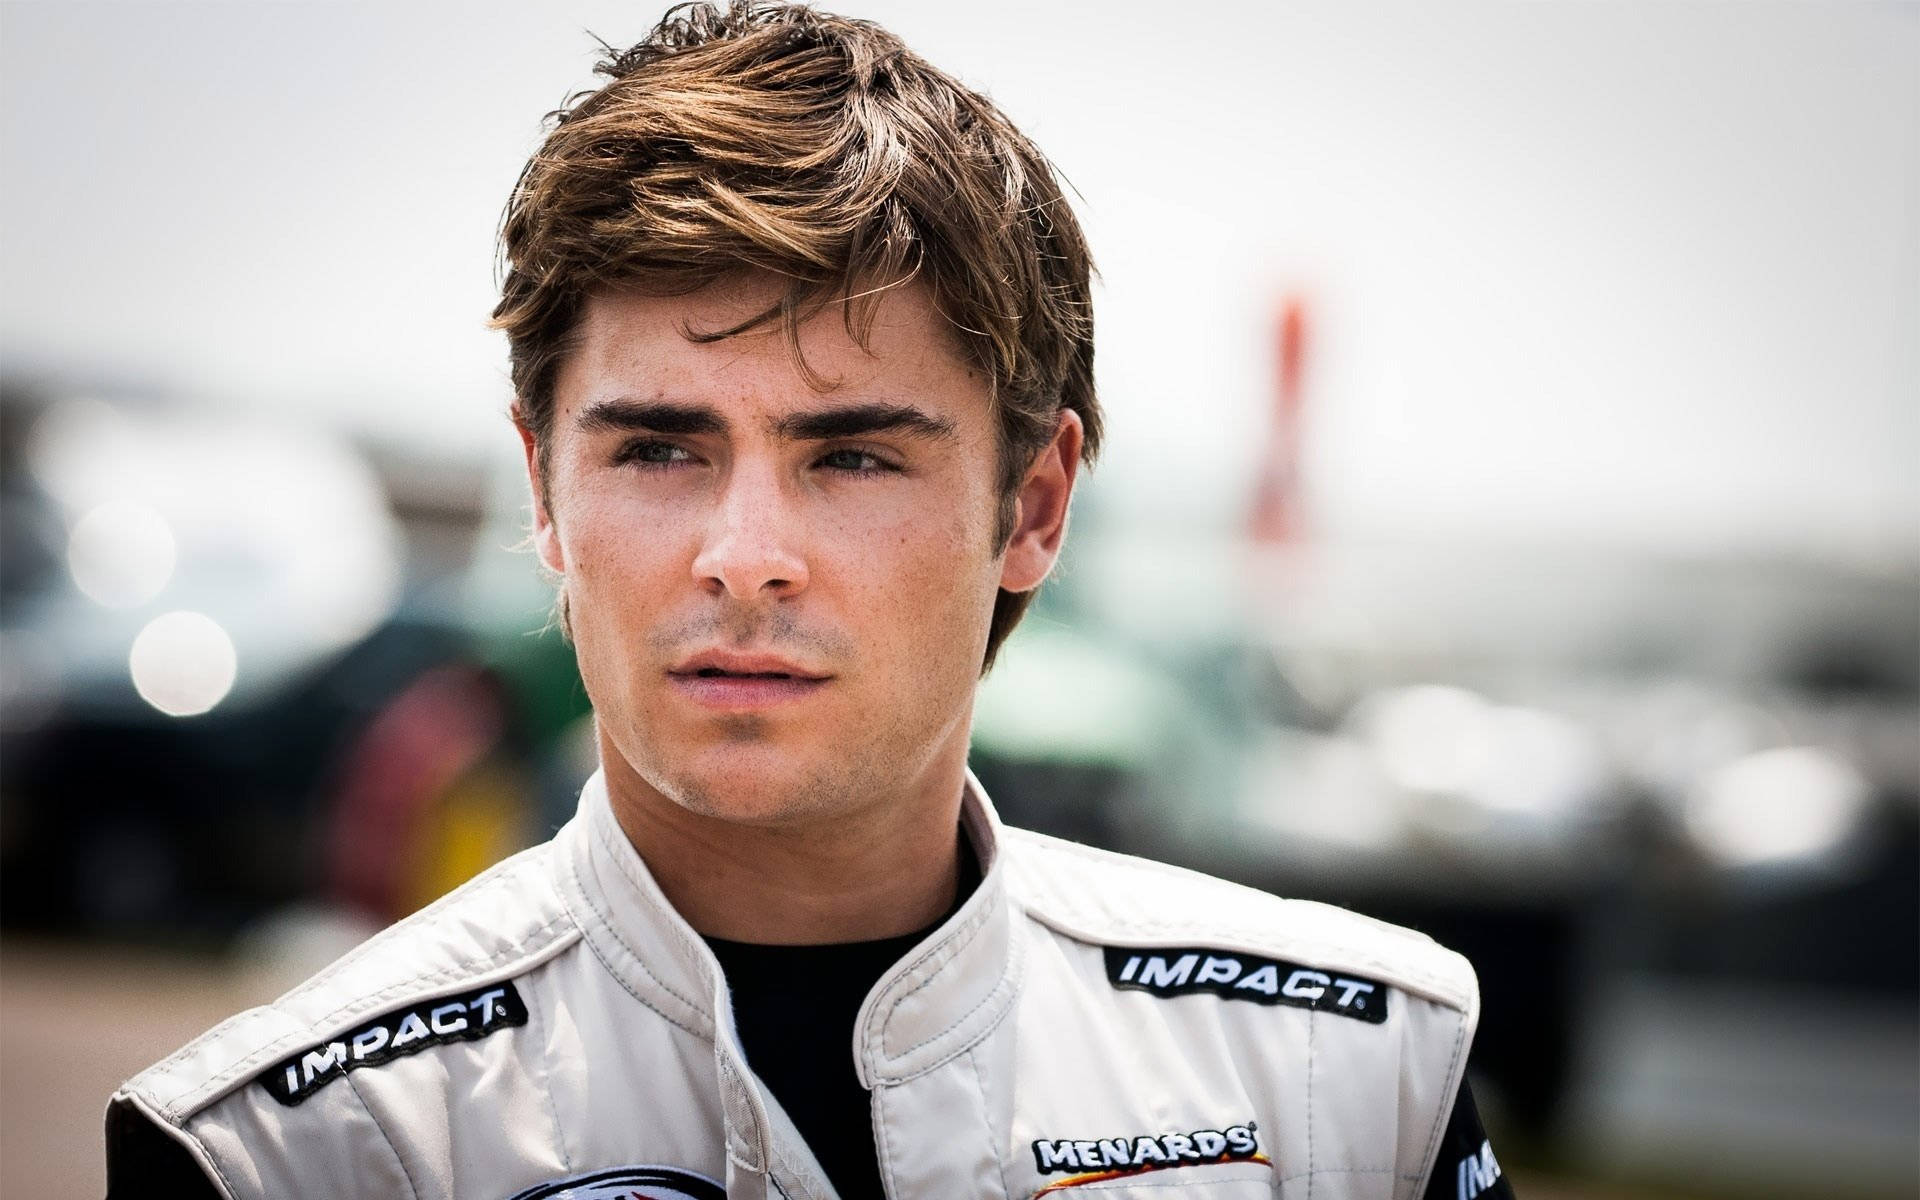 Zac Efron Wearing A Racing Suit Background